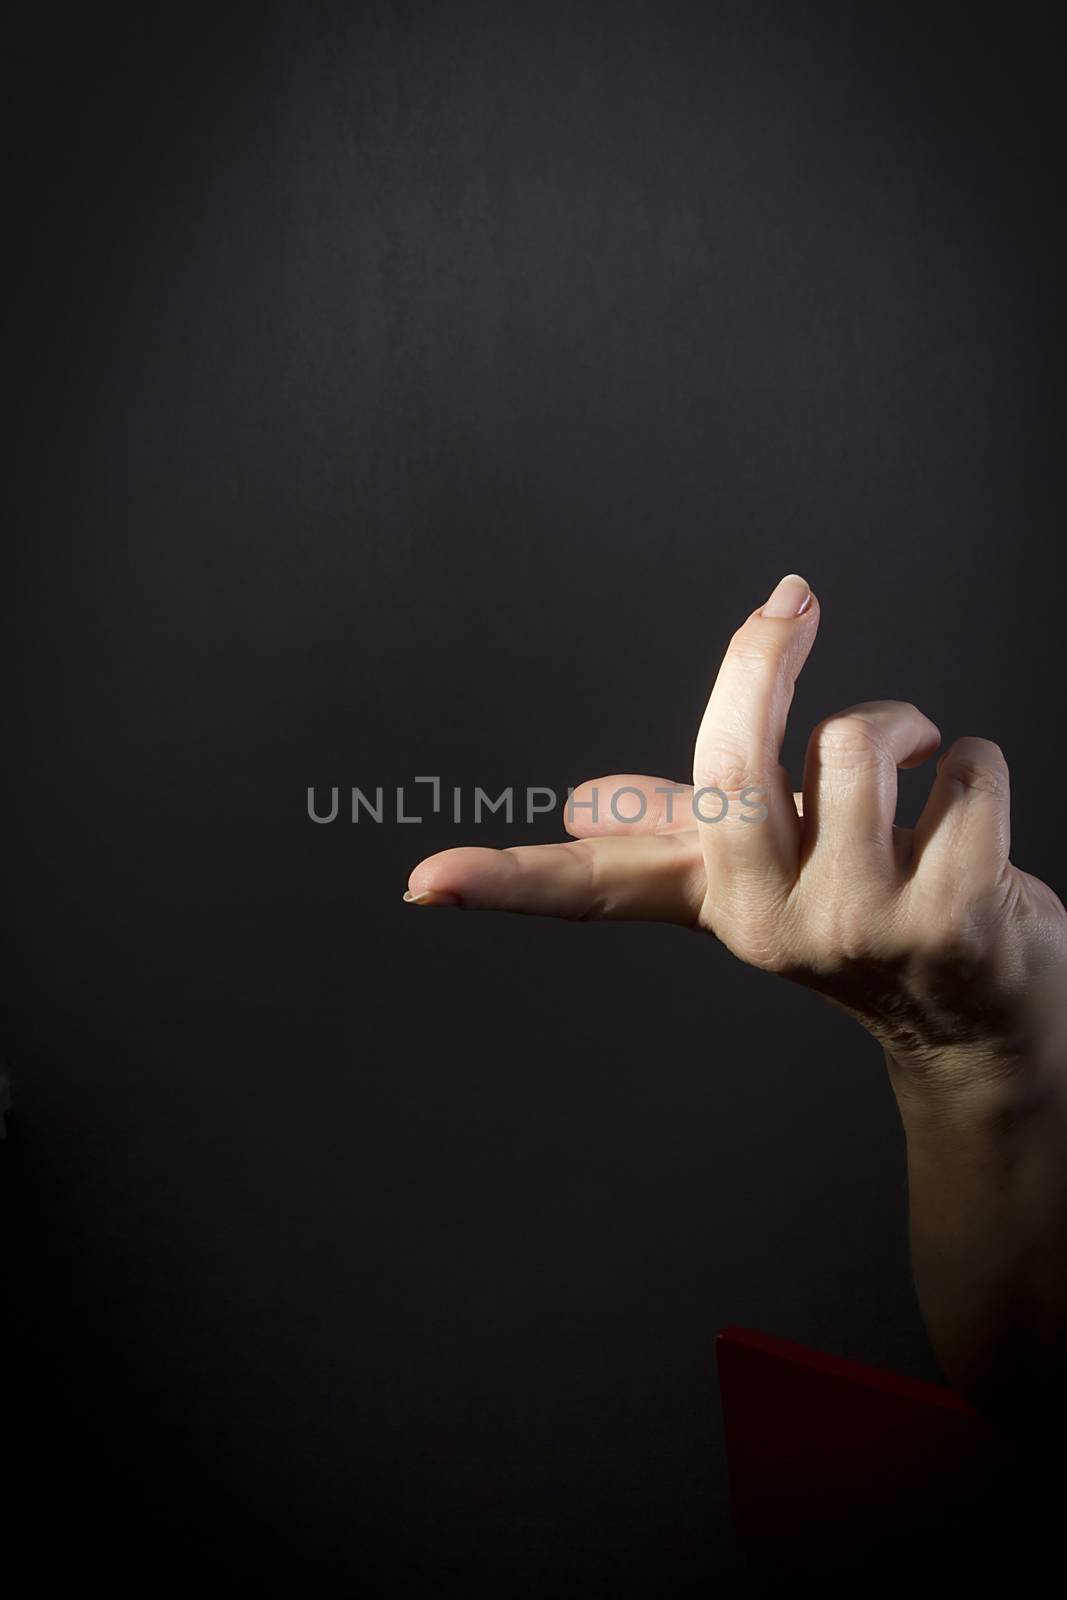 Female hand with protruding forefinger on black background